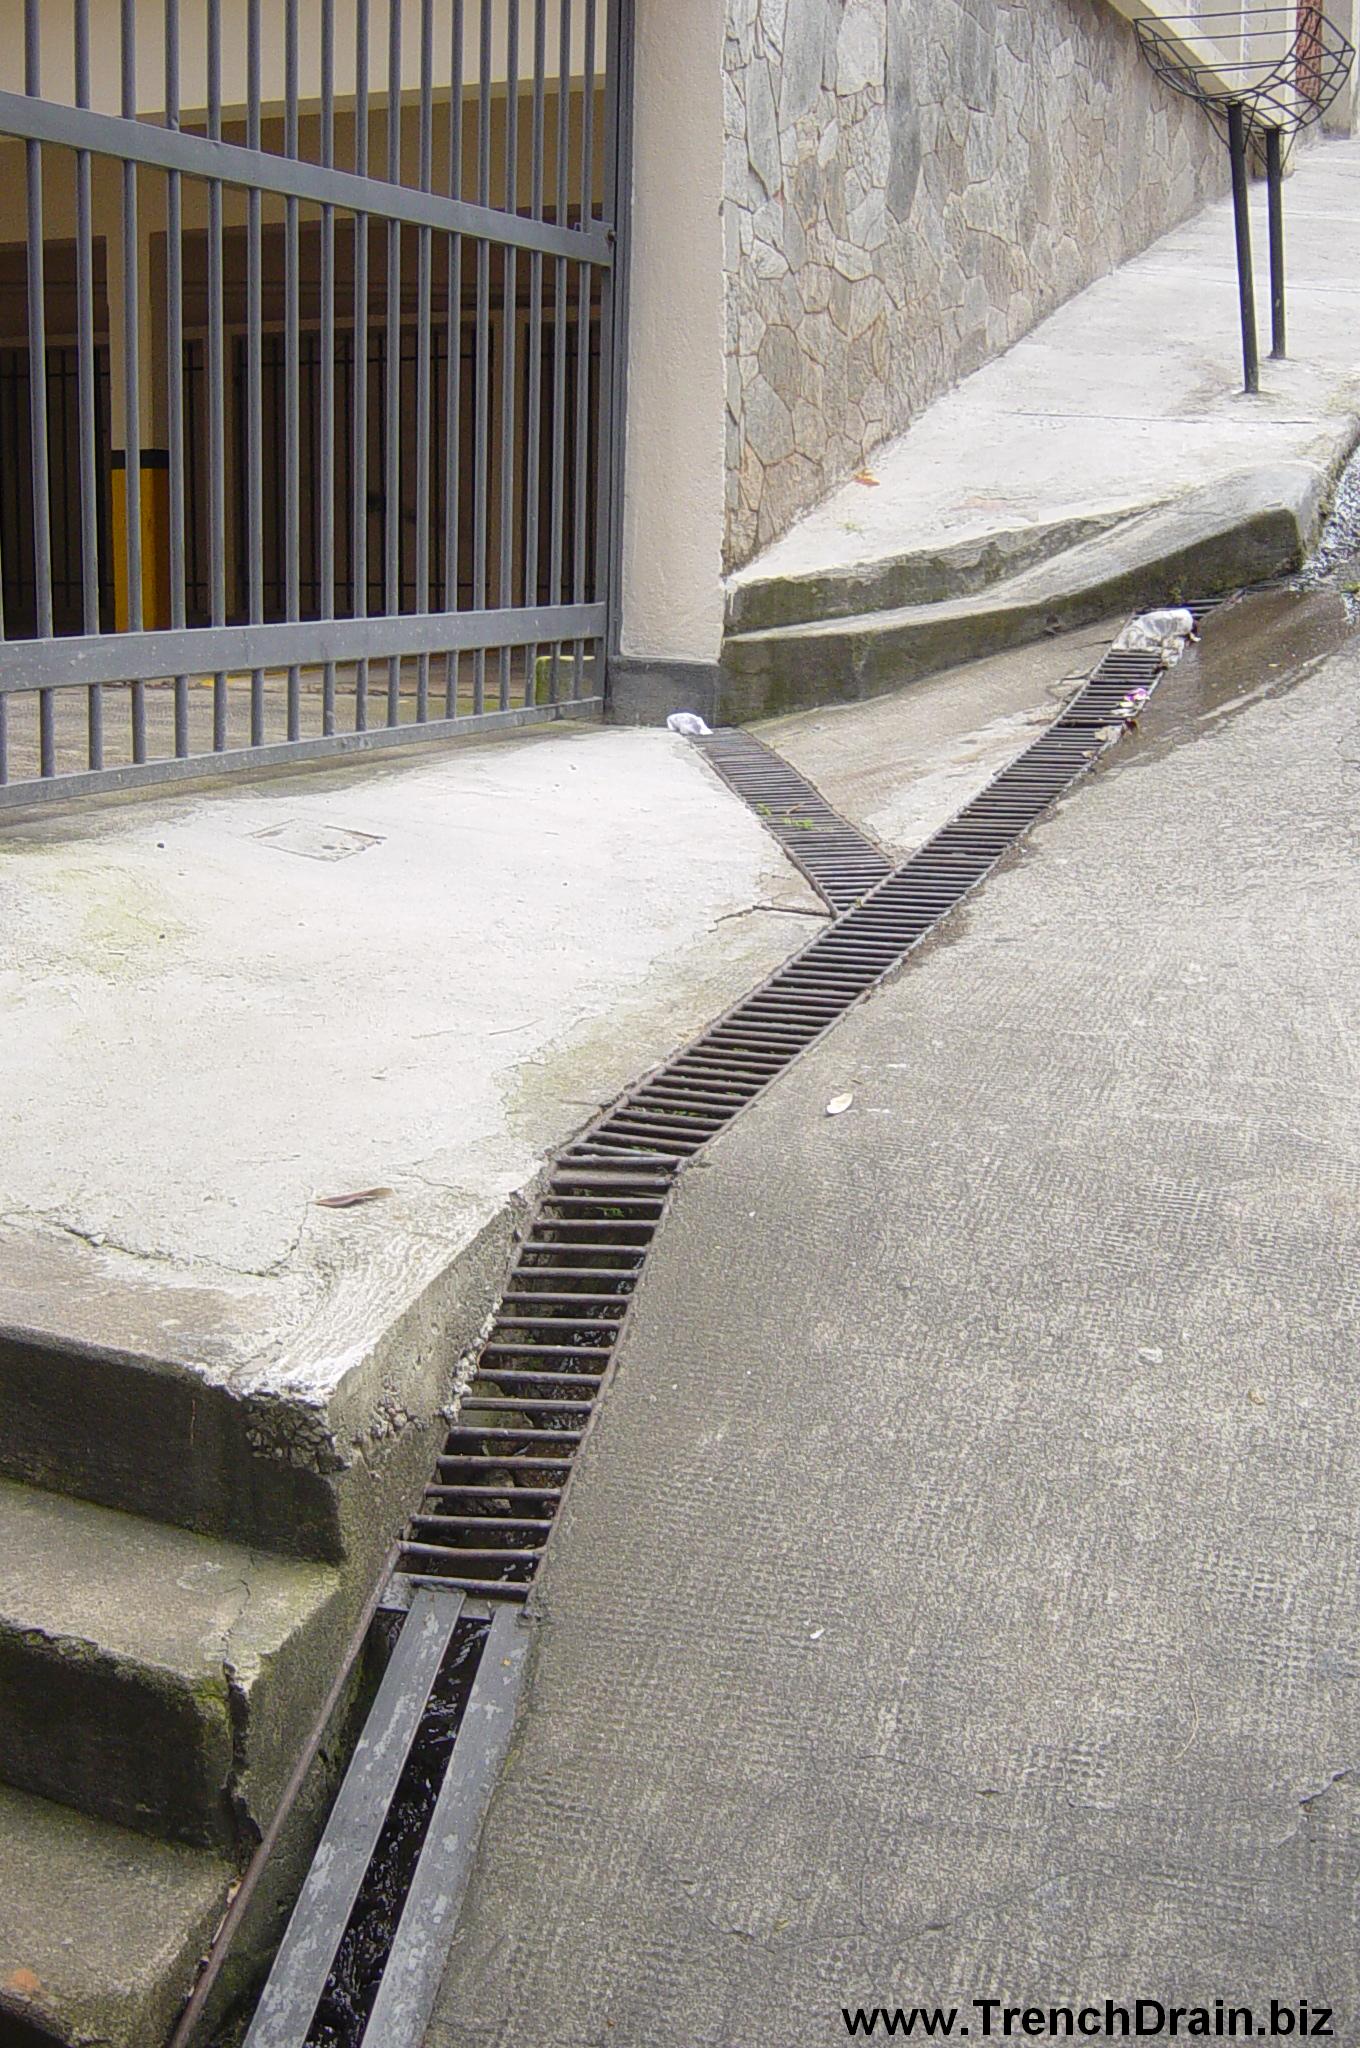 street trench drains, trench drains for roadways, sidewalk trench drains,